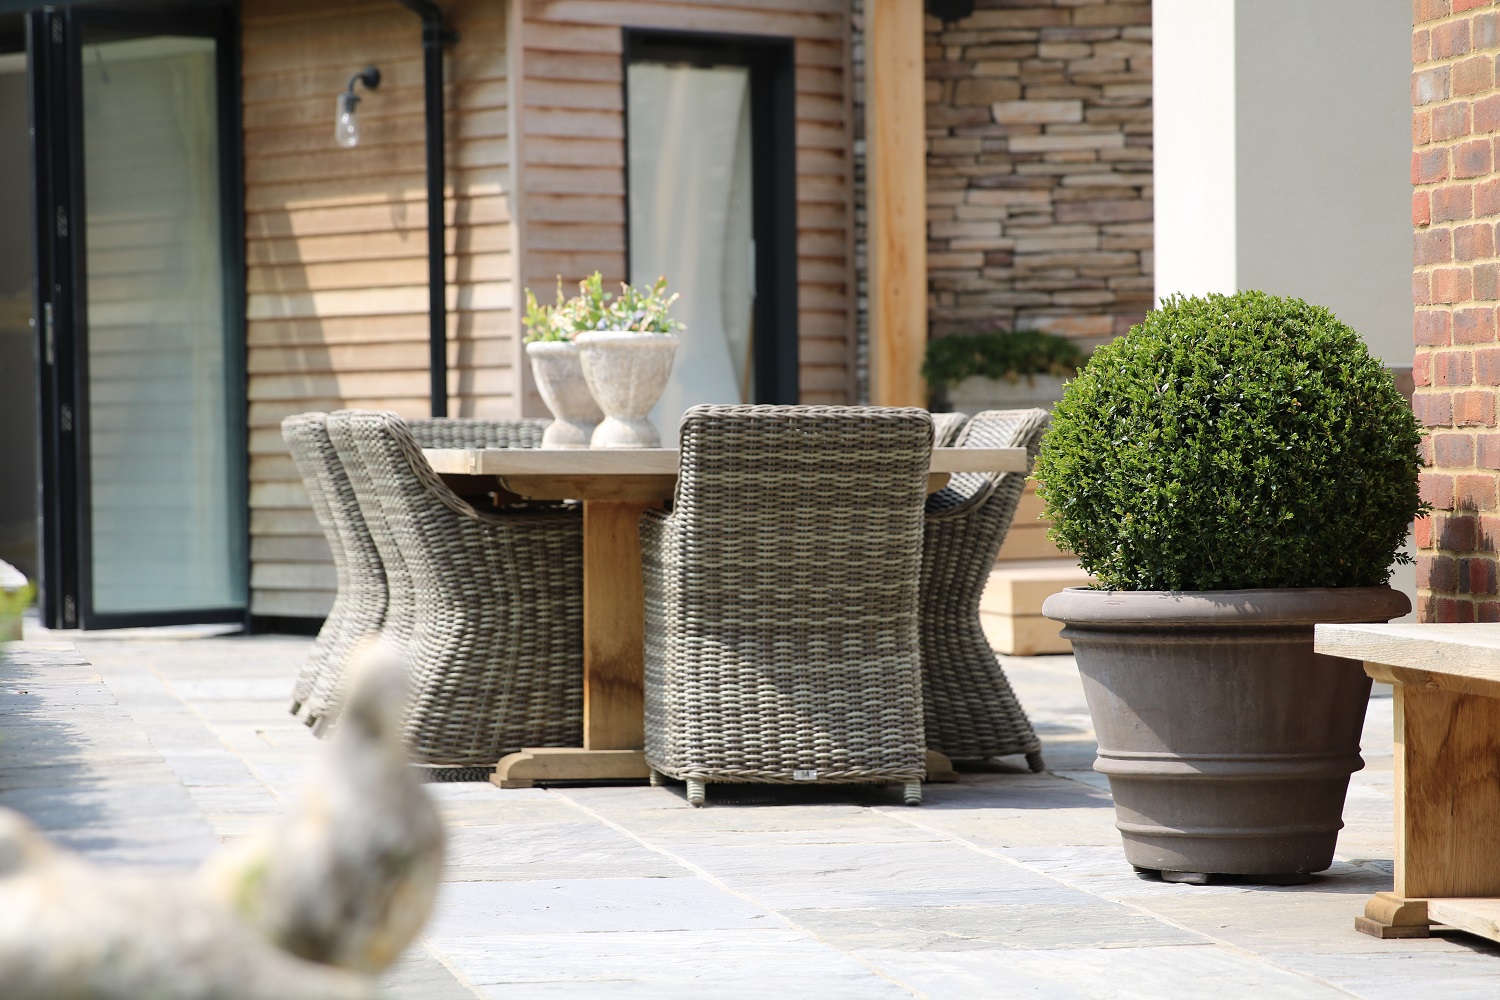 Trimmed shrub in pot on Black tumbled Indian sandstone paving with outdoor furniture with french doors in background.